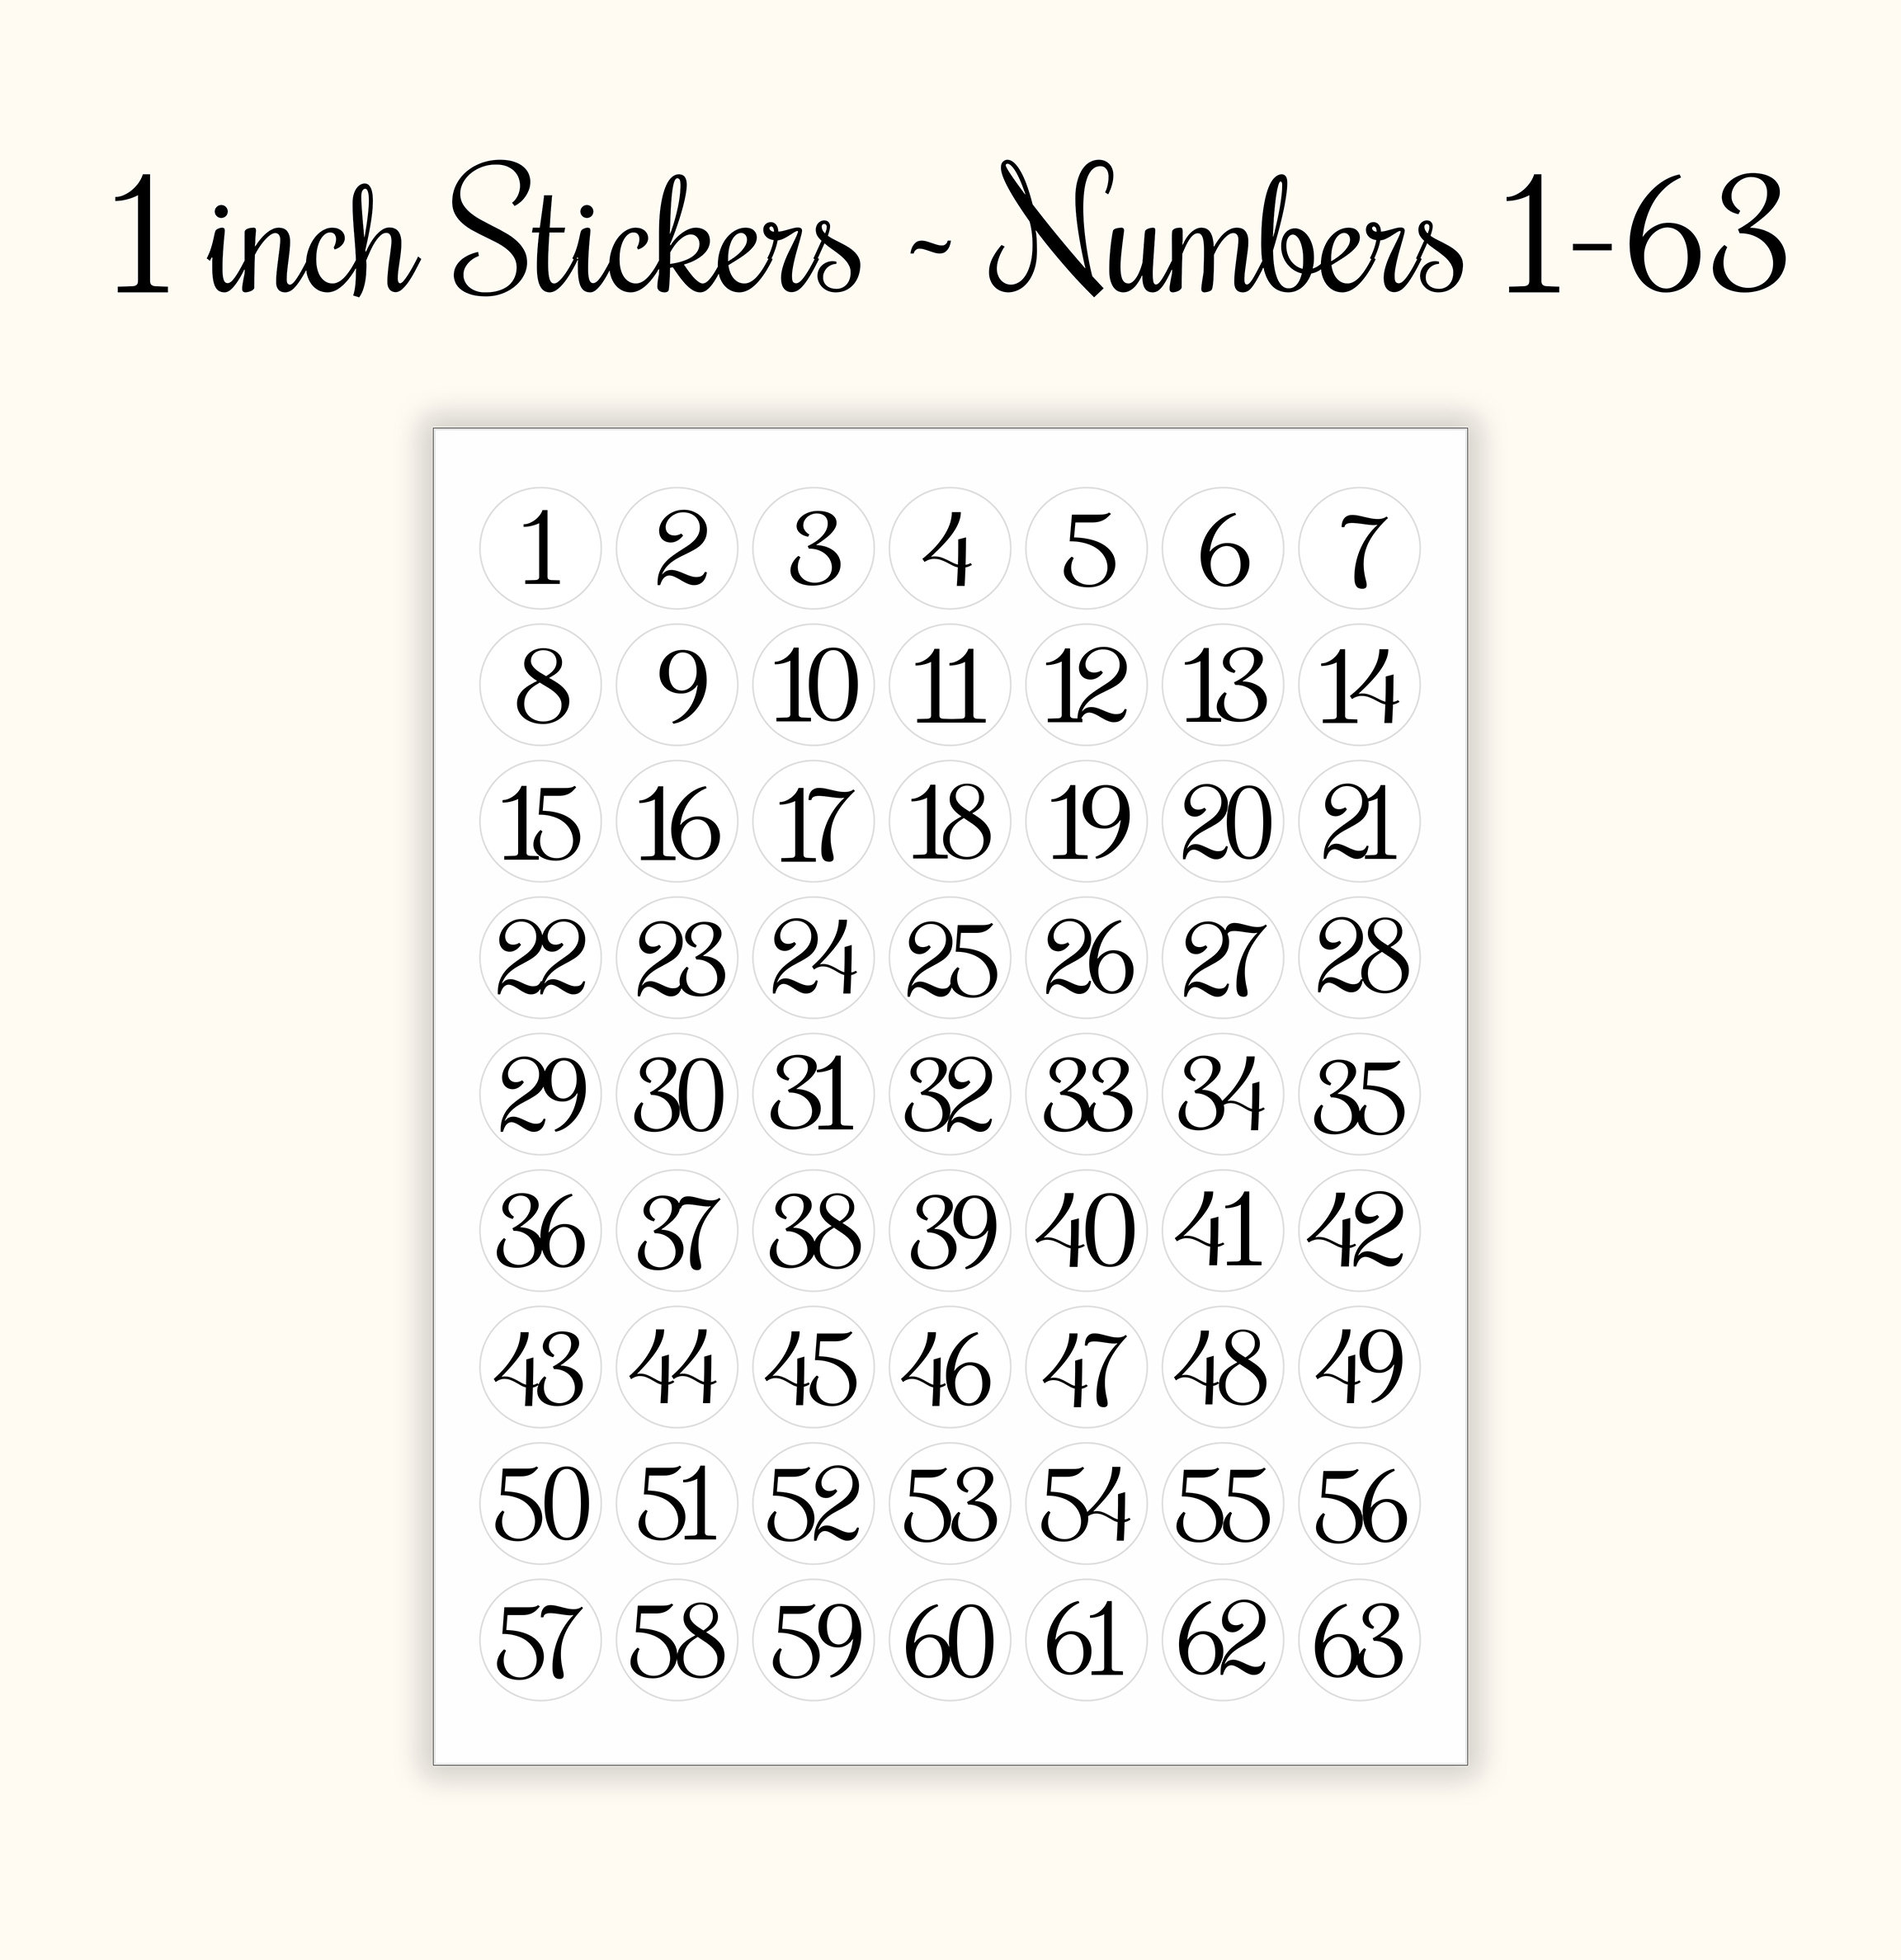 NUMBERS 163 STICKERS Sequential1various Colors,circle Labels  Consecutive,organize,number Sticker,self Adhesive Label,journal Stickers 